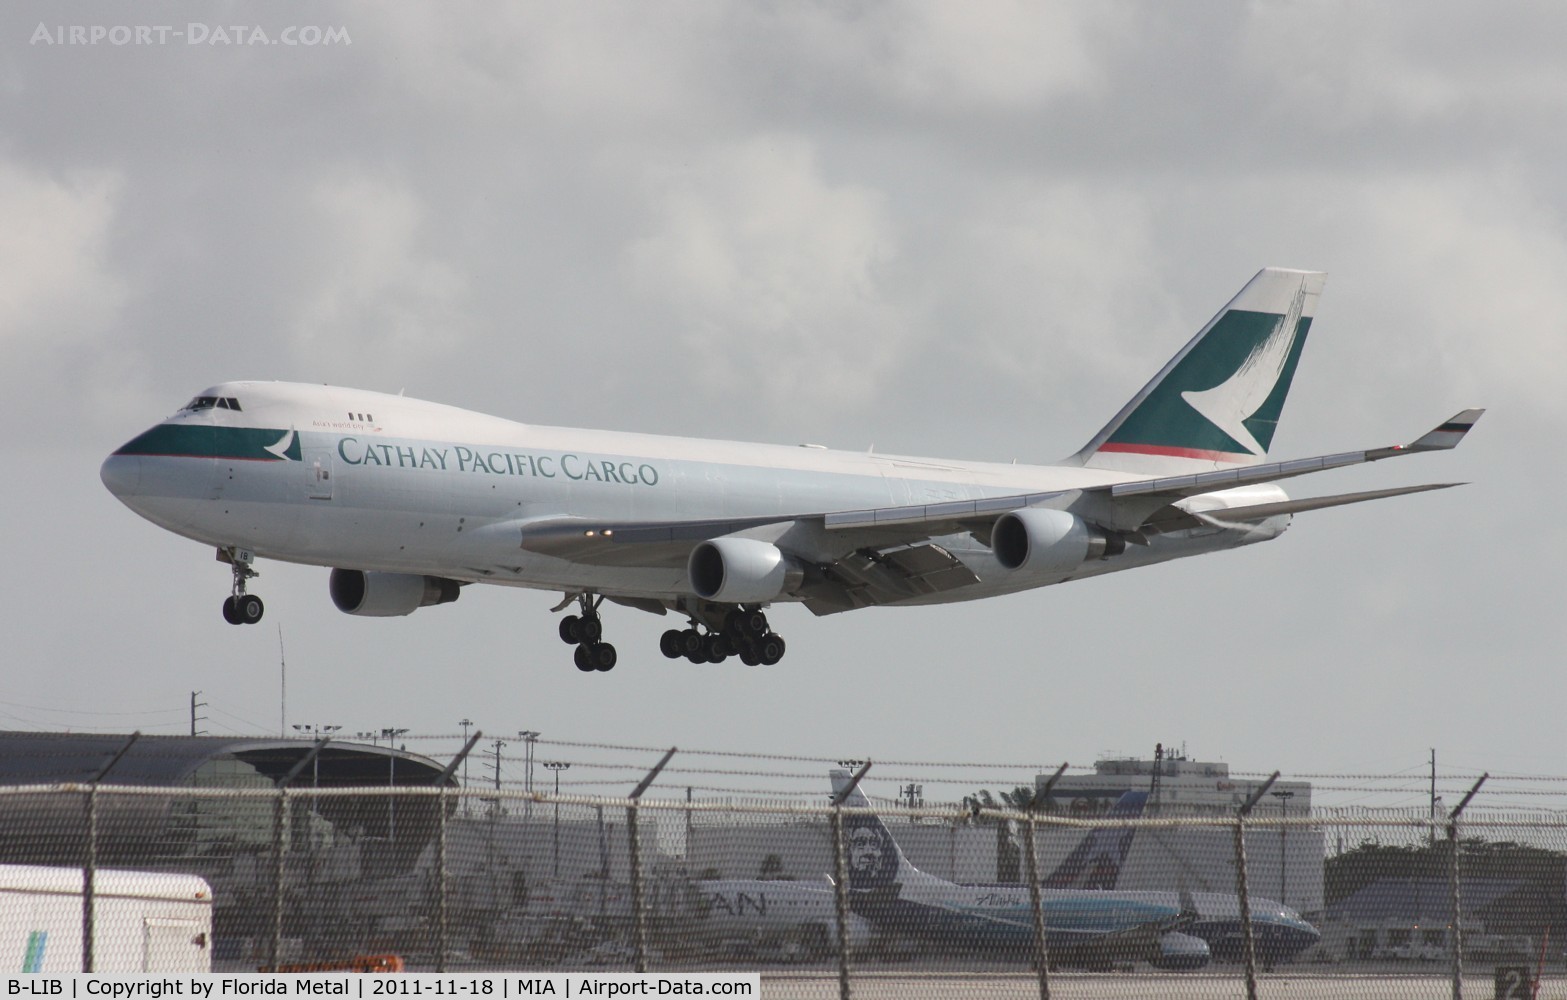 B-LIB, 2008 Boeing 747-467ERF C/N 36867, Windshift brought Cathay Cargo in on Runway 30.  I had 10 min to get from photo holes to 94th Aero Squadron, The traffic red lights around MIA last nearly 10 min so I might have violated a few traffic laws to make it